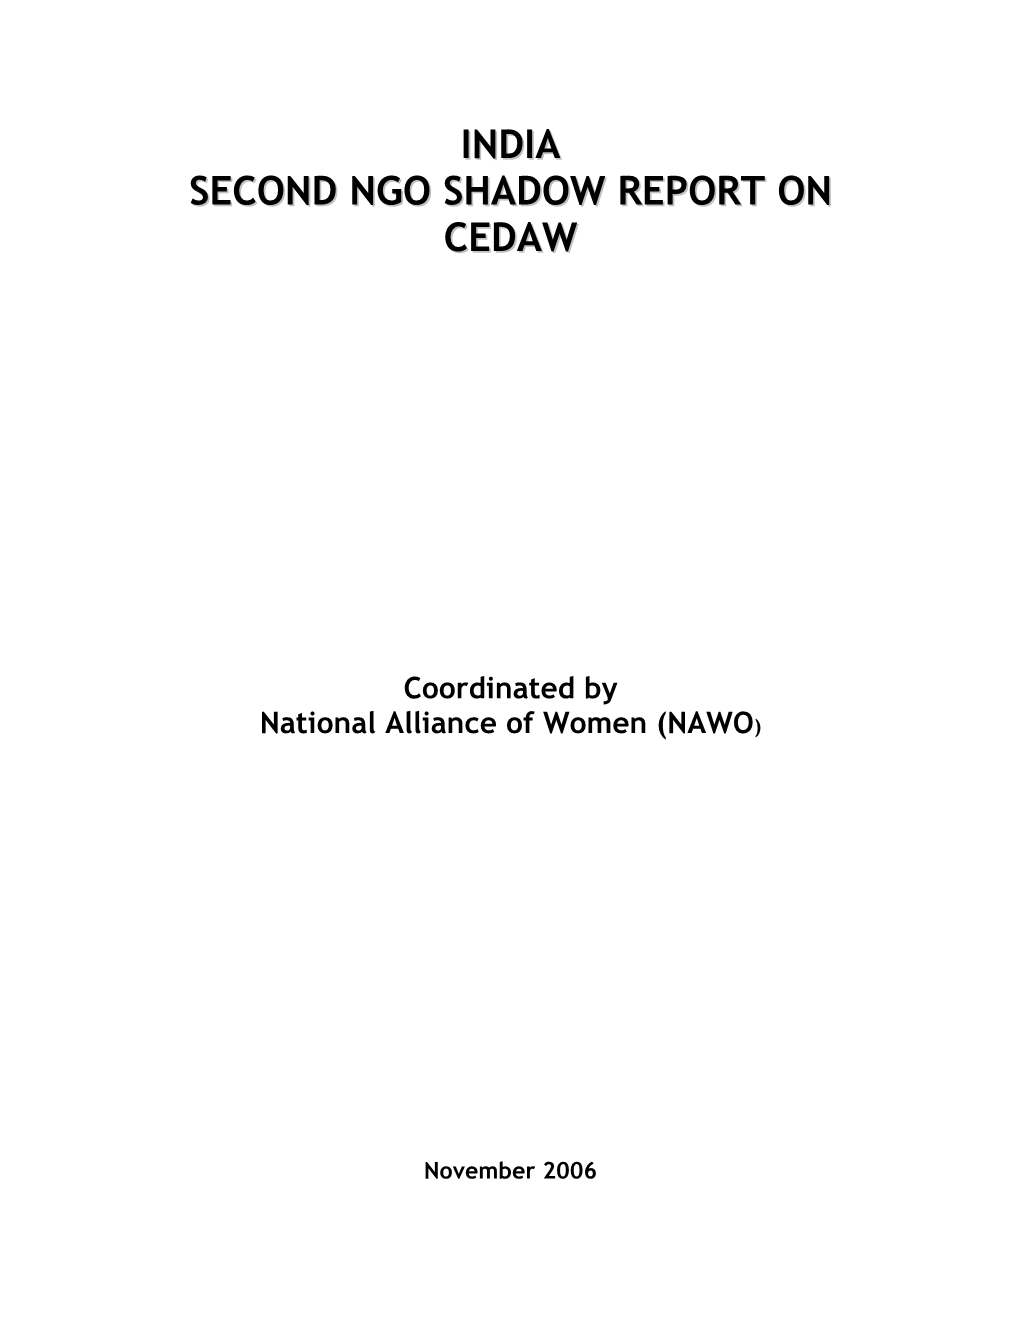 India Second Ngo Shadow Report on Cedaw